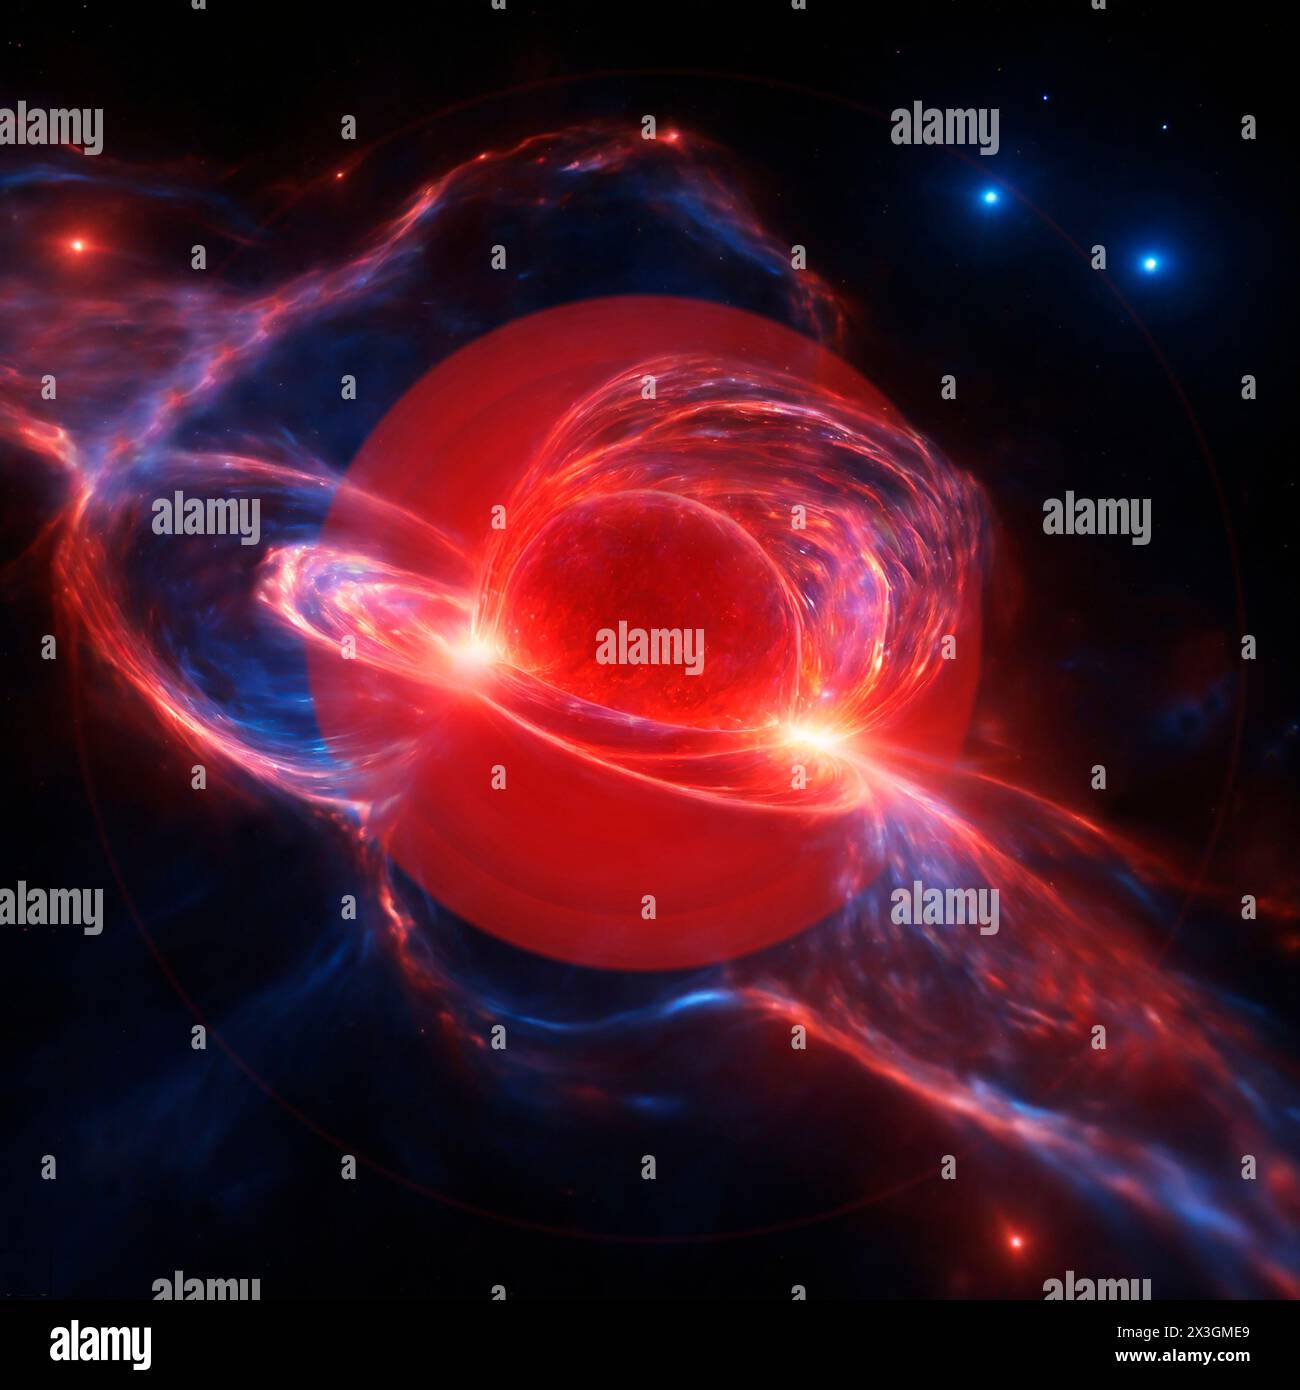 Thorne–Zytkow object (ZTO), illustration. This is a hypothetical star that forms when a neutron star and red giant star collide and merge. The neutron star forms the core of the ZTO. Stock Photo